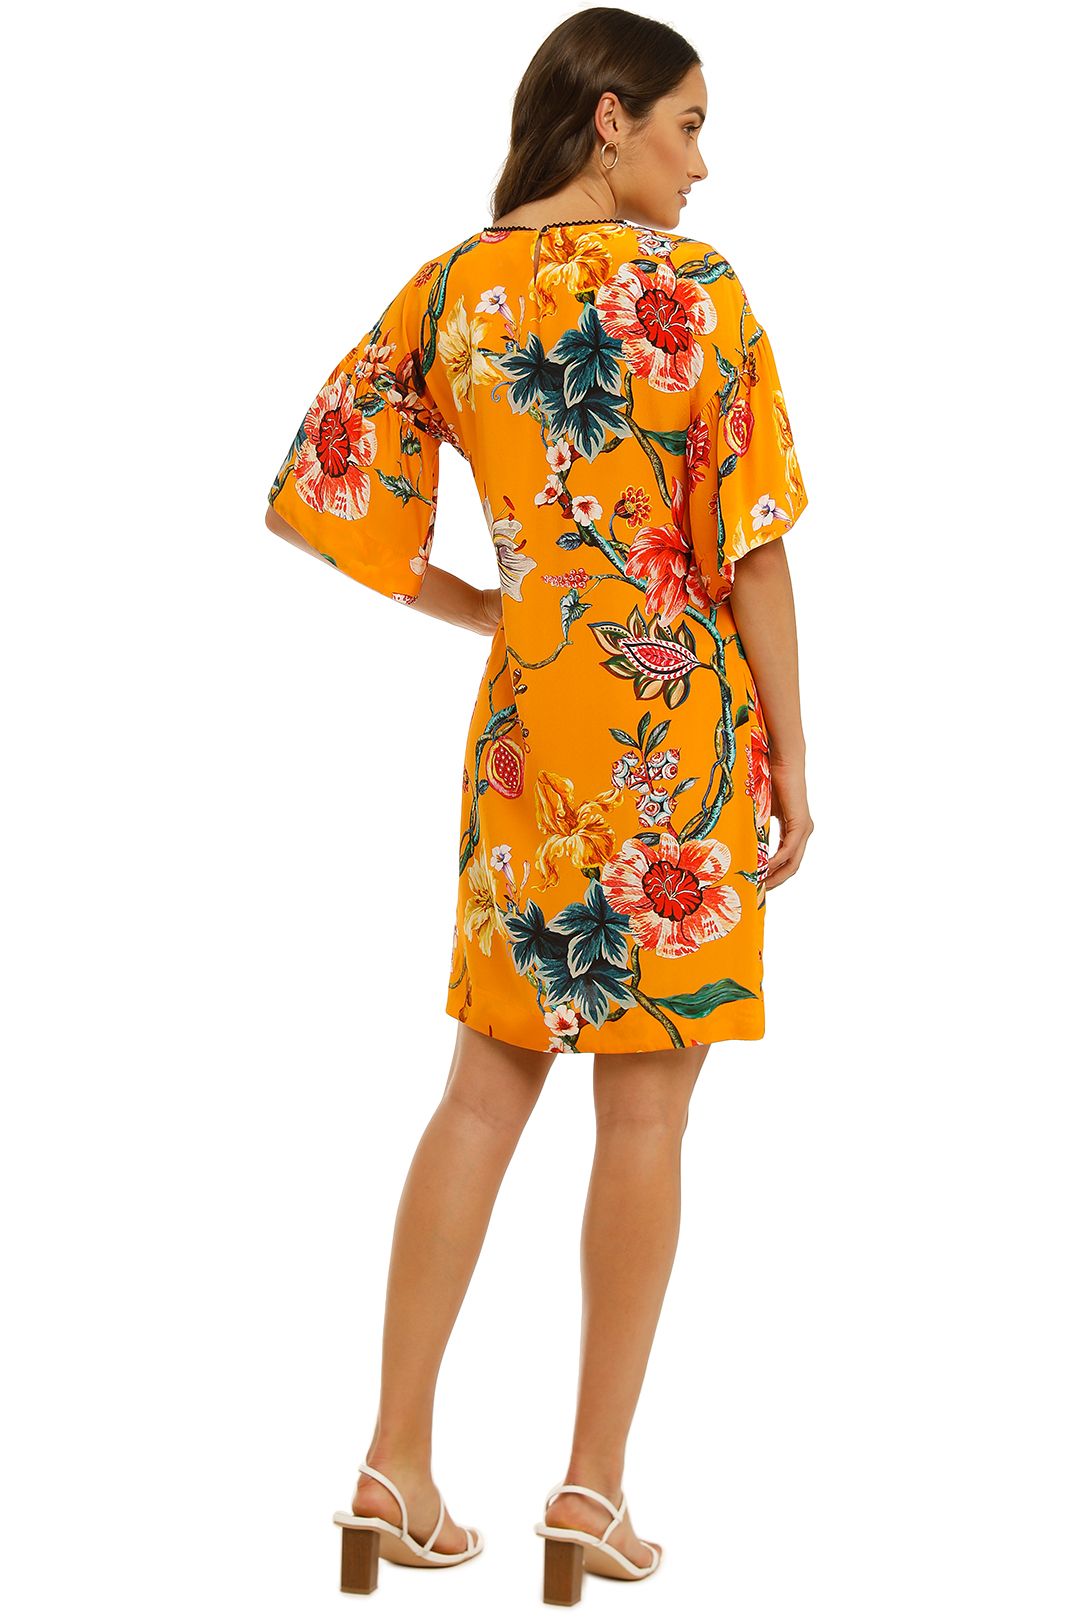 Trelise-Cooper-Nice-To-Sweet-You Tunic-Mango-Floral-Back